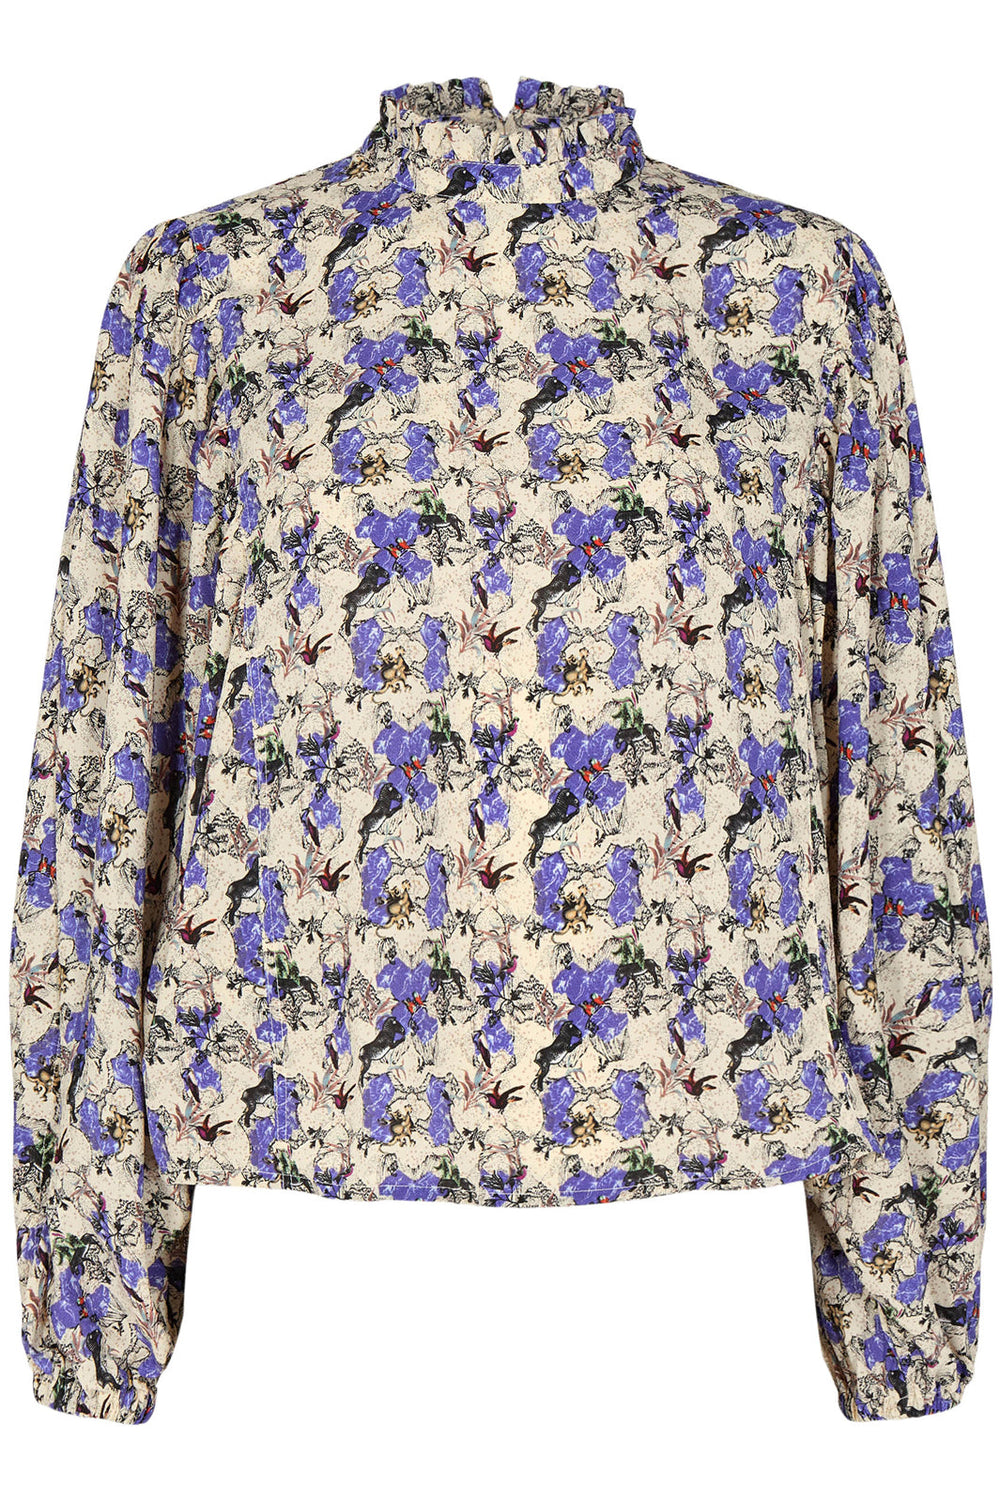 Co'couture - Tracey Blouse - Purple Bluser 